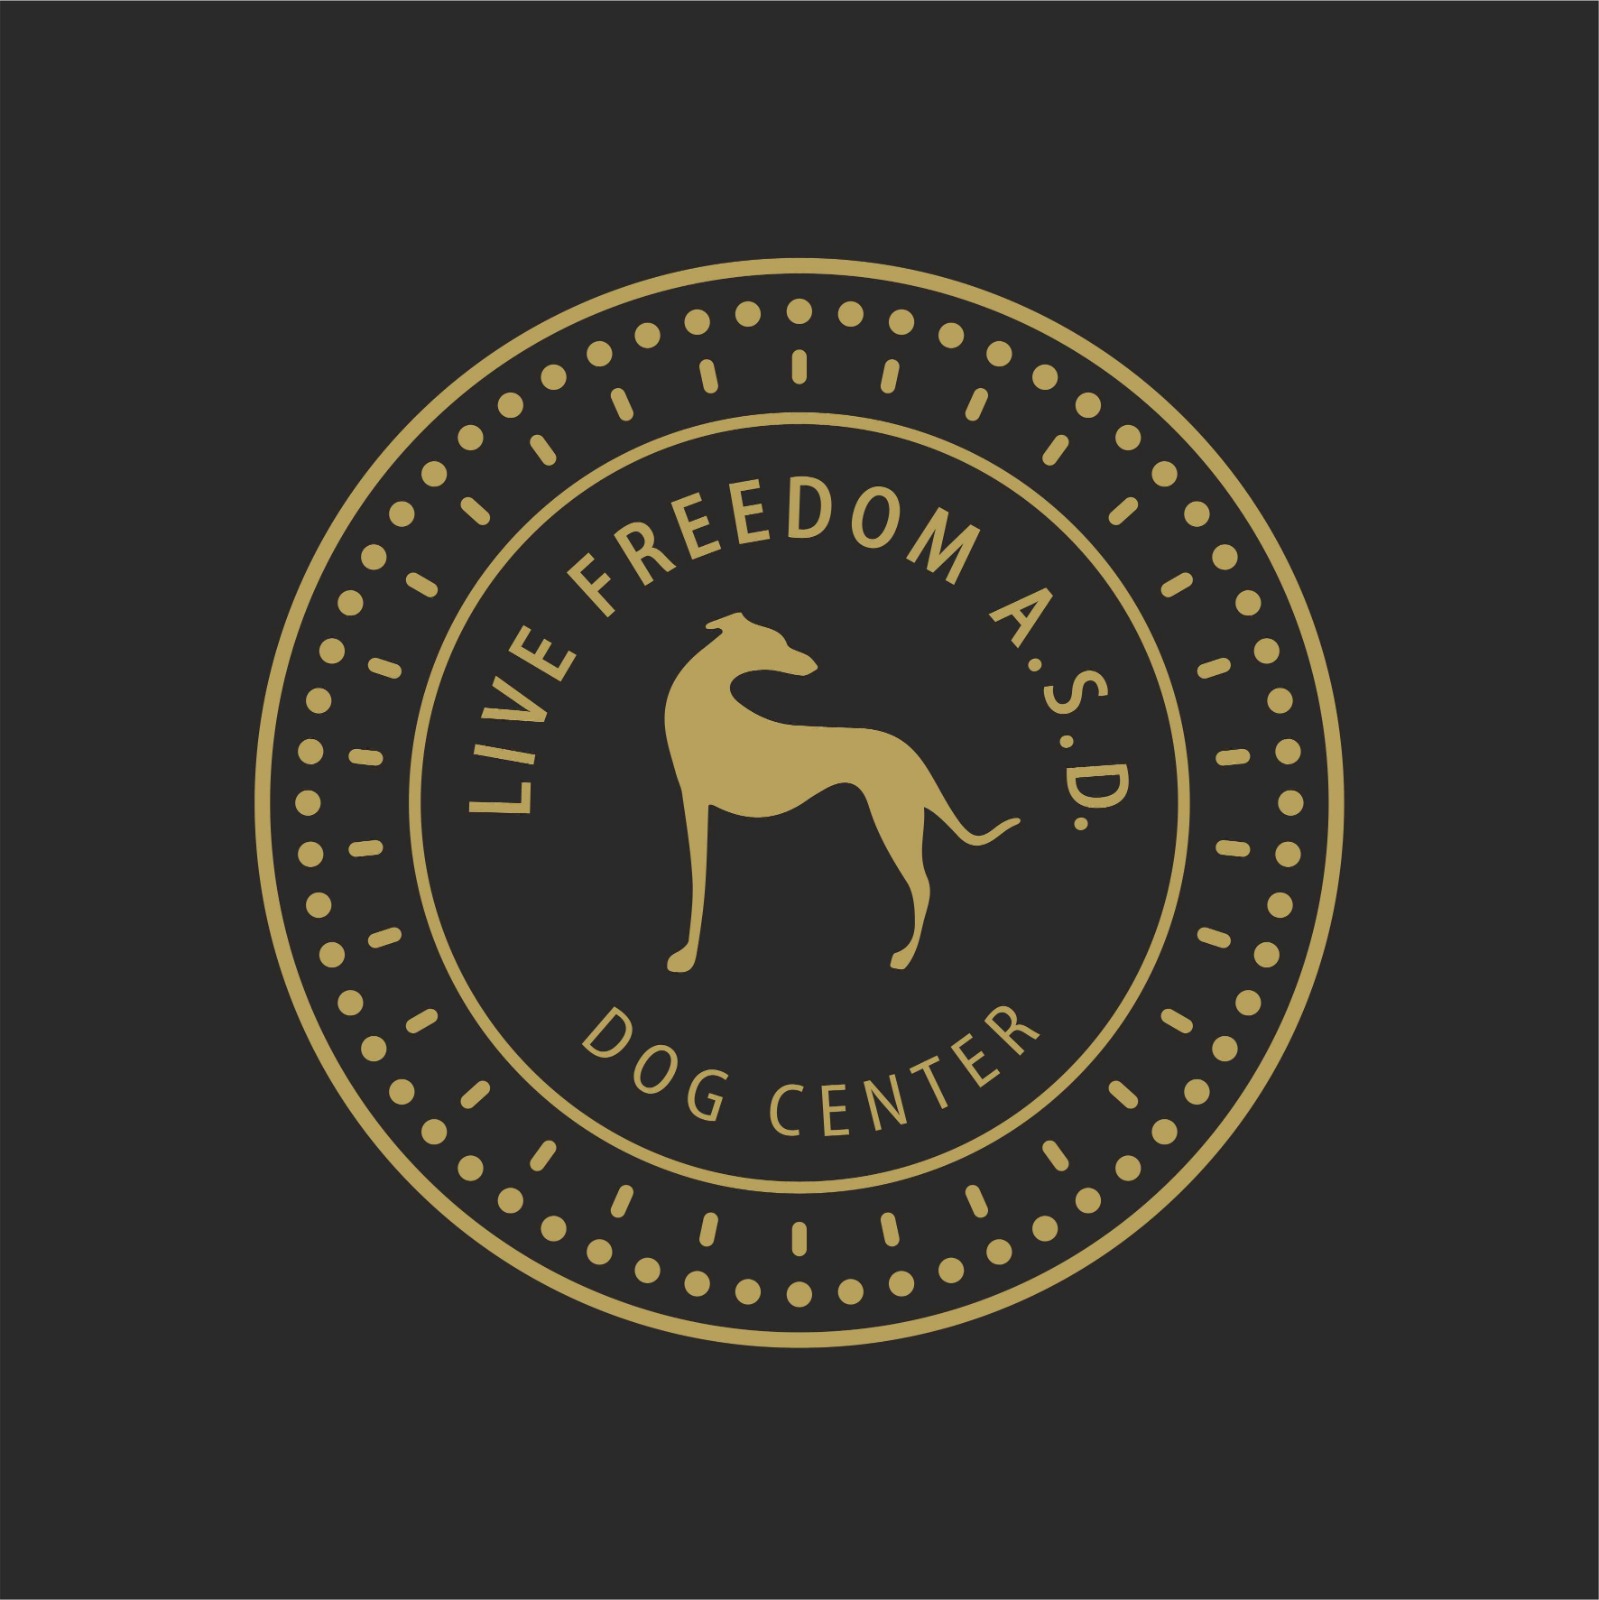 LIVE   FREEDOM   A.S.D.